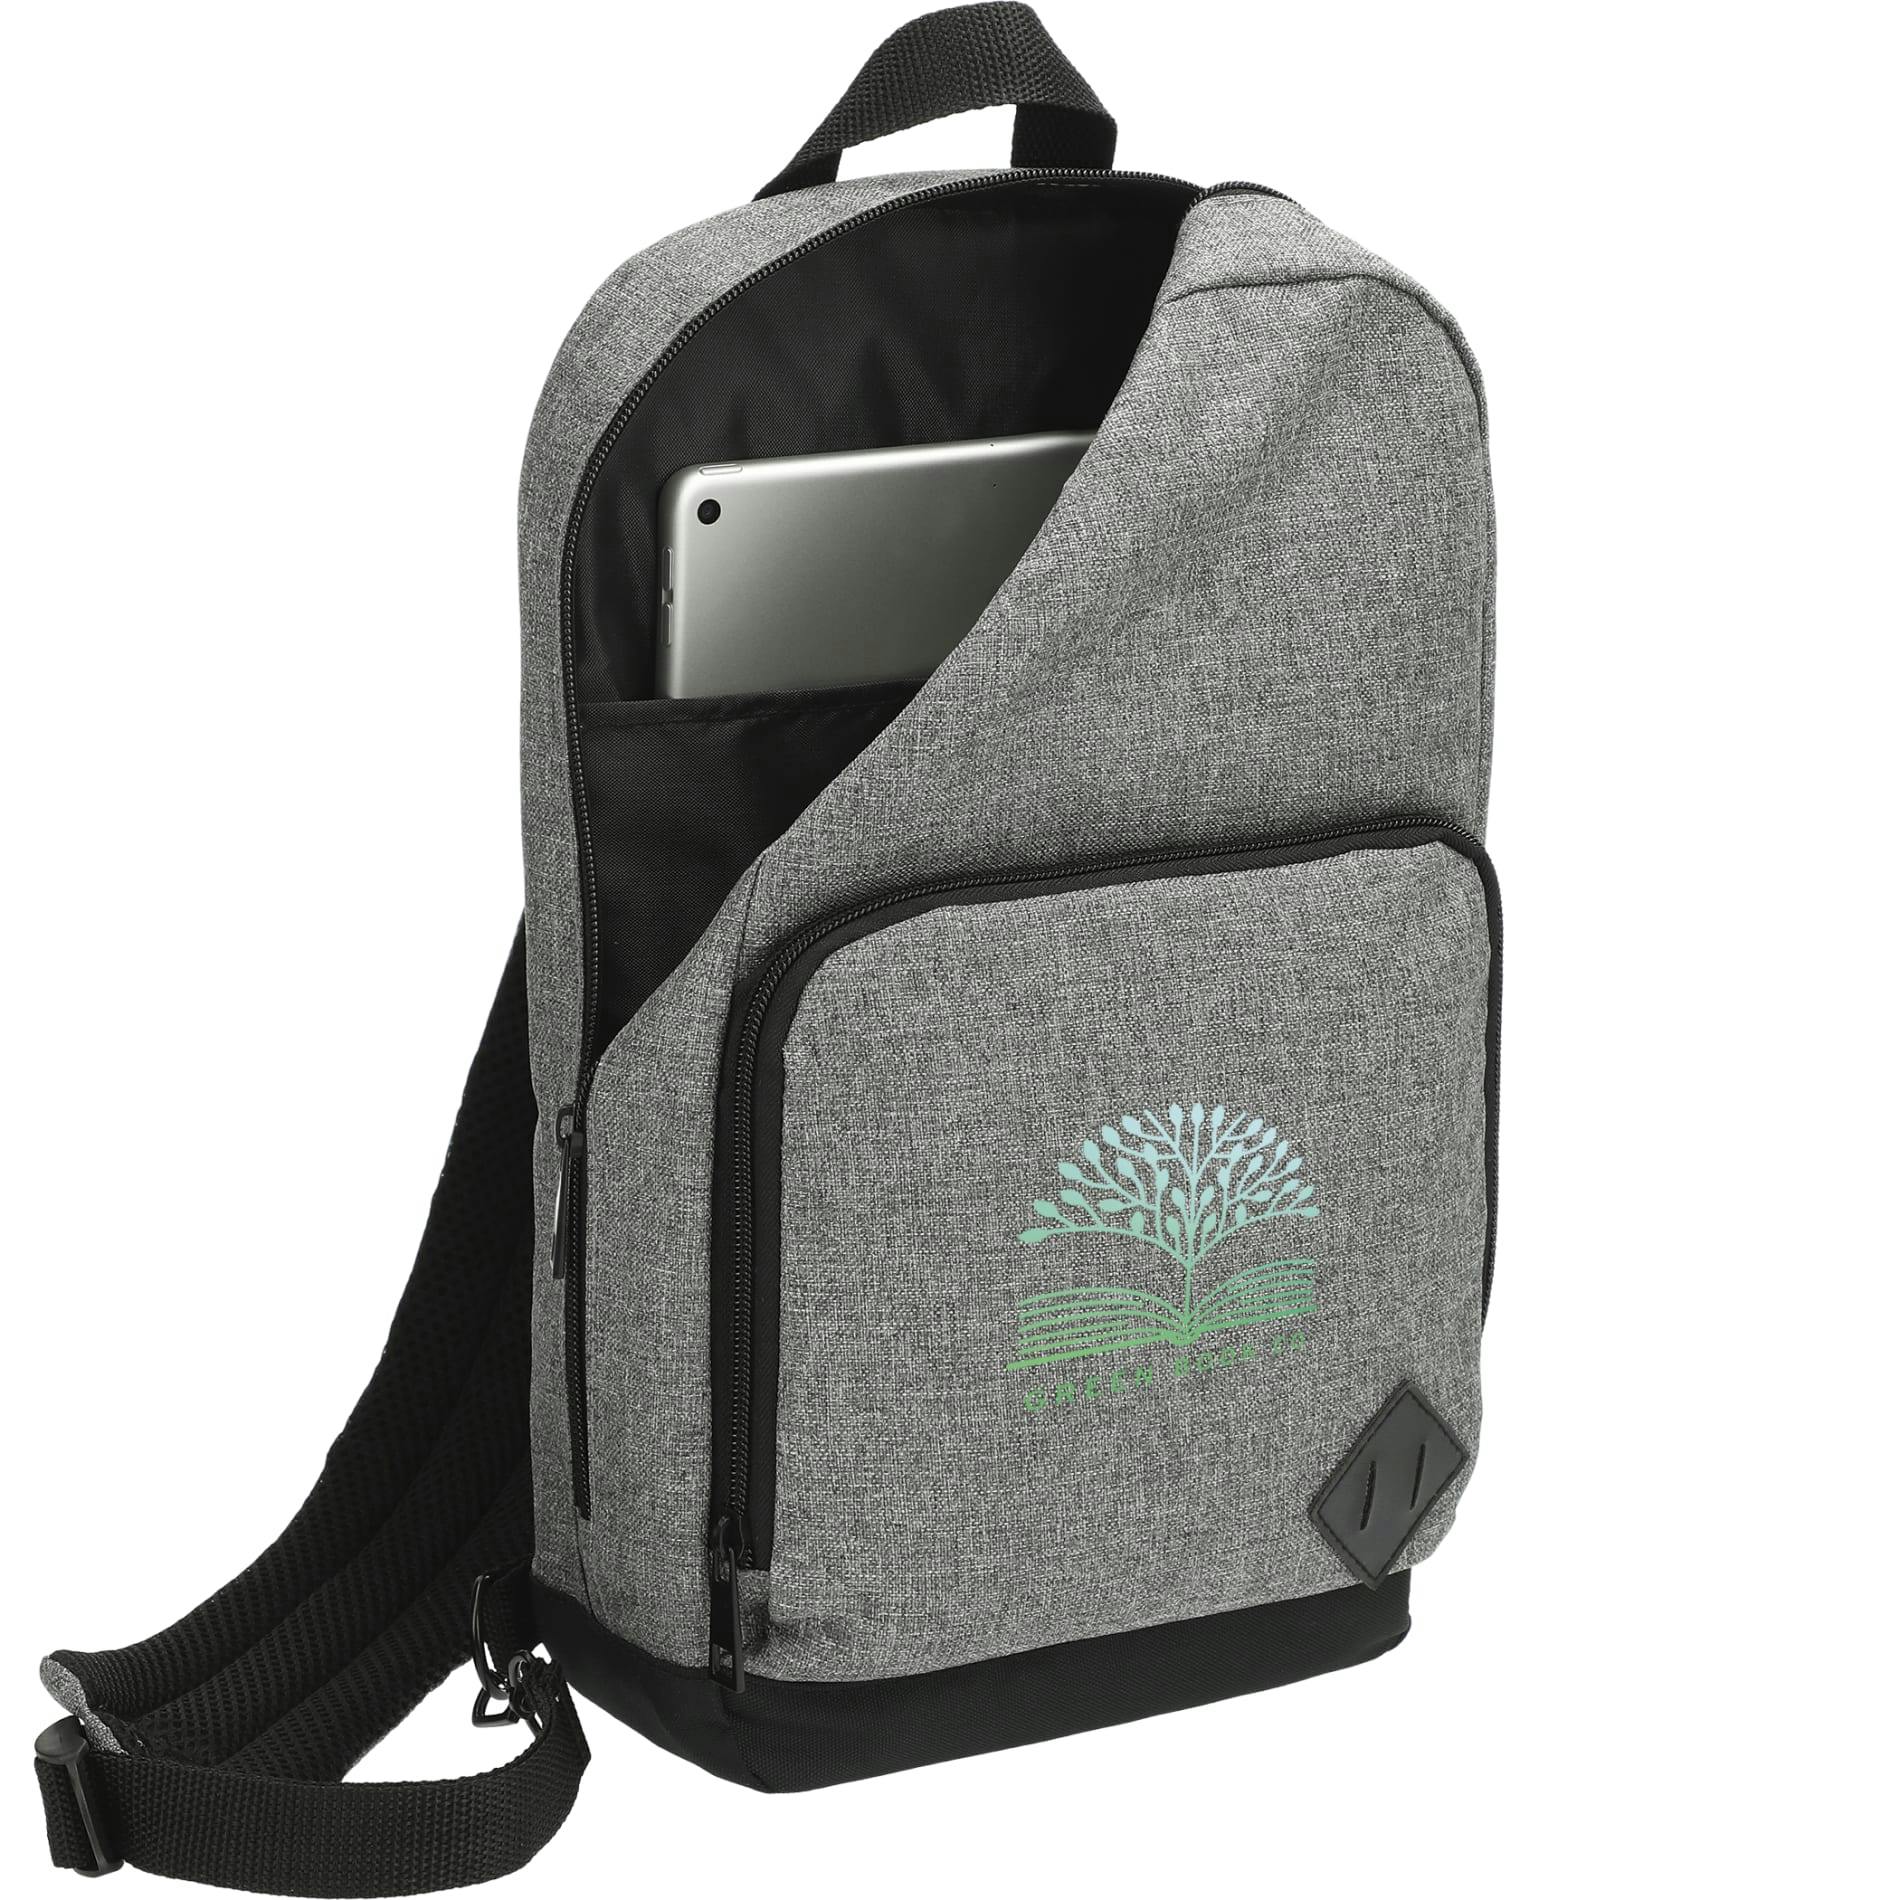 Graphite Deluxe Recycled Sling Backpack - additional Image 1